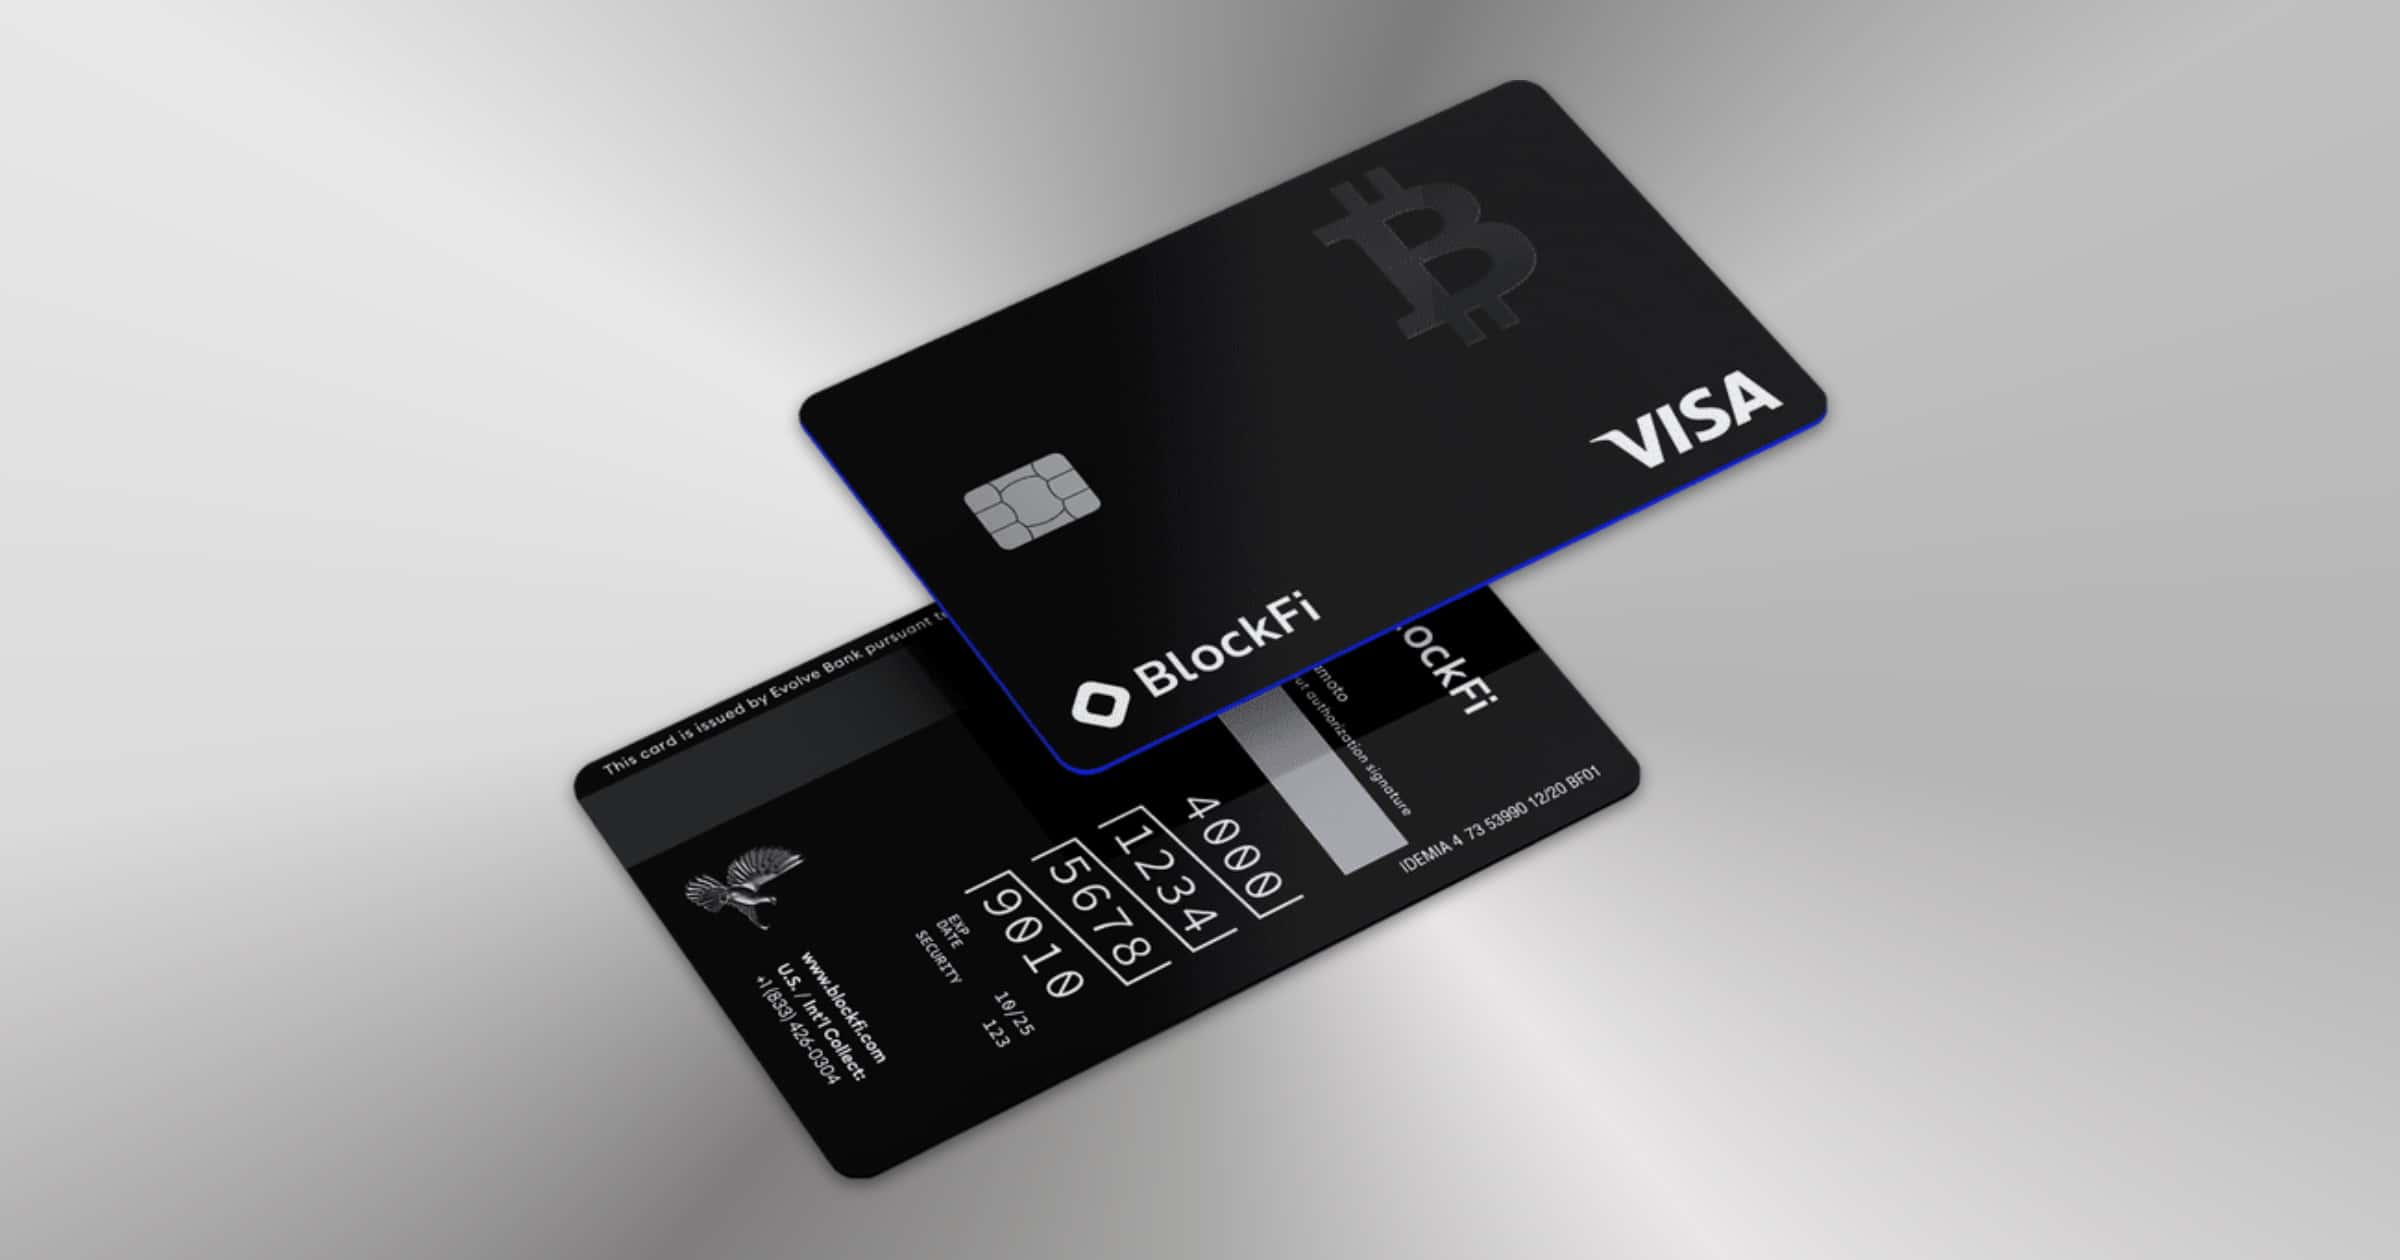 fund crypto.com with credit card